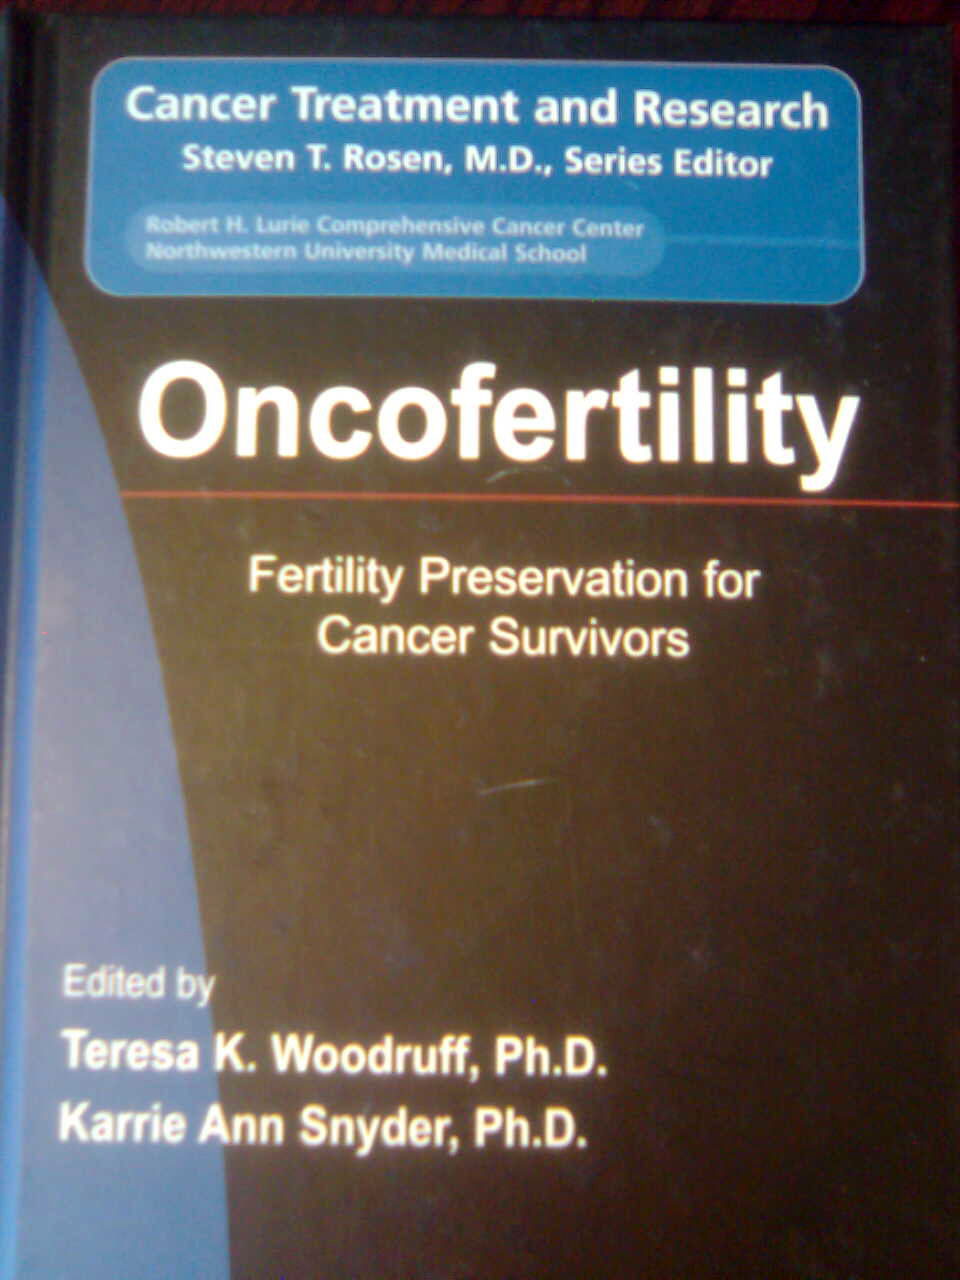 Cover of the Oncofertility book reviewed by Dr. Jared Robins in the journal Fertility and Sterility